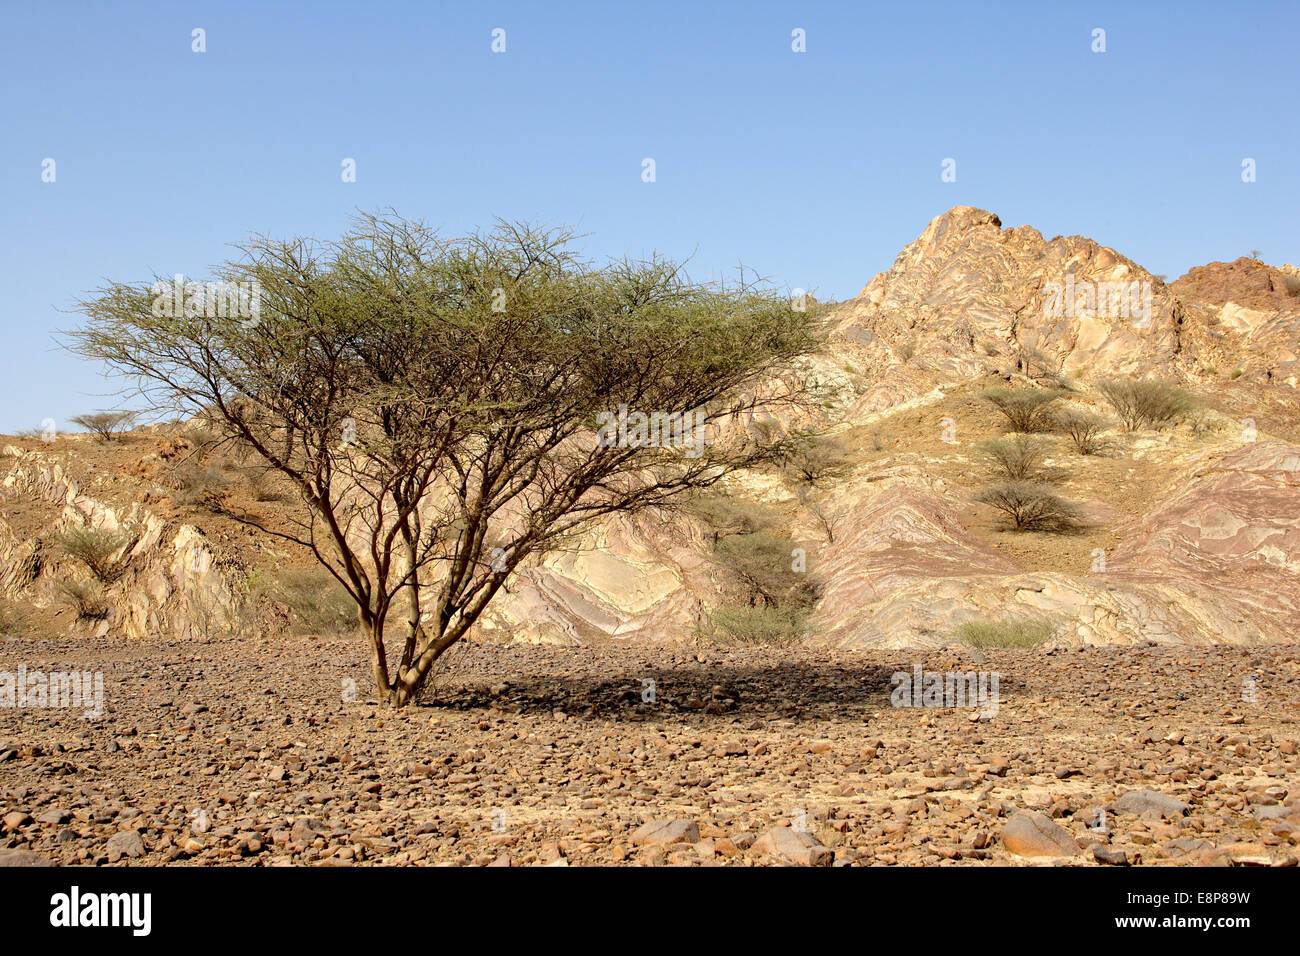 An umbrella thorn acacia growing on a gravel plain in the A'Tuwawah area of the Sultanate of Oman. Stock Photo